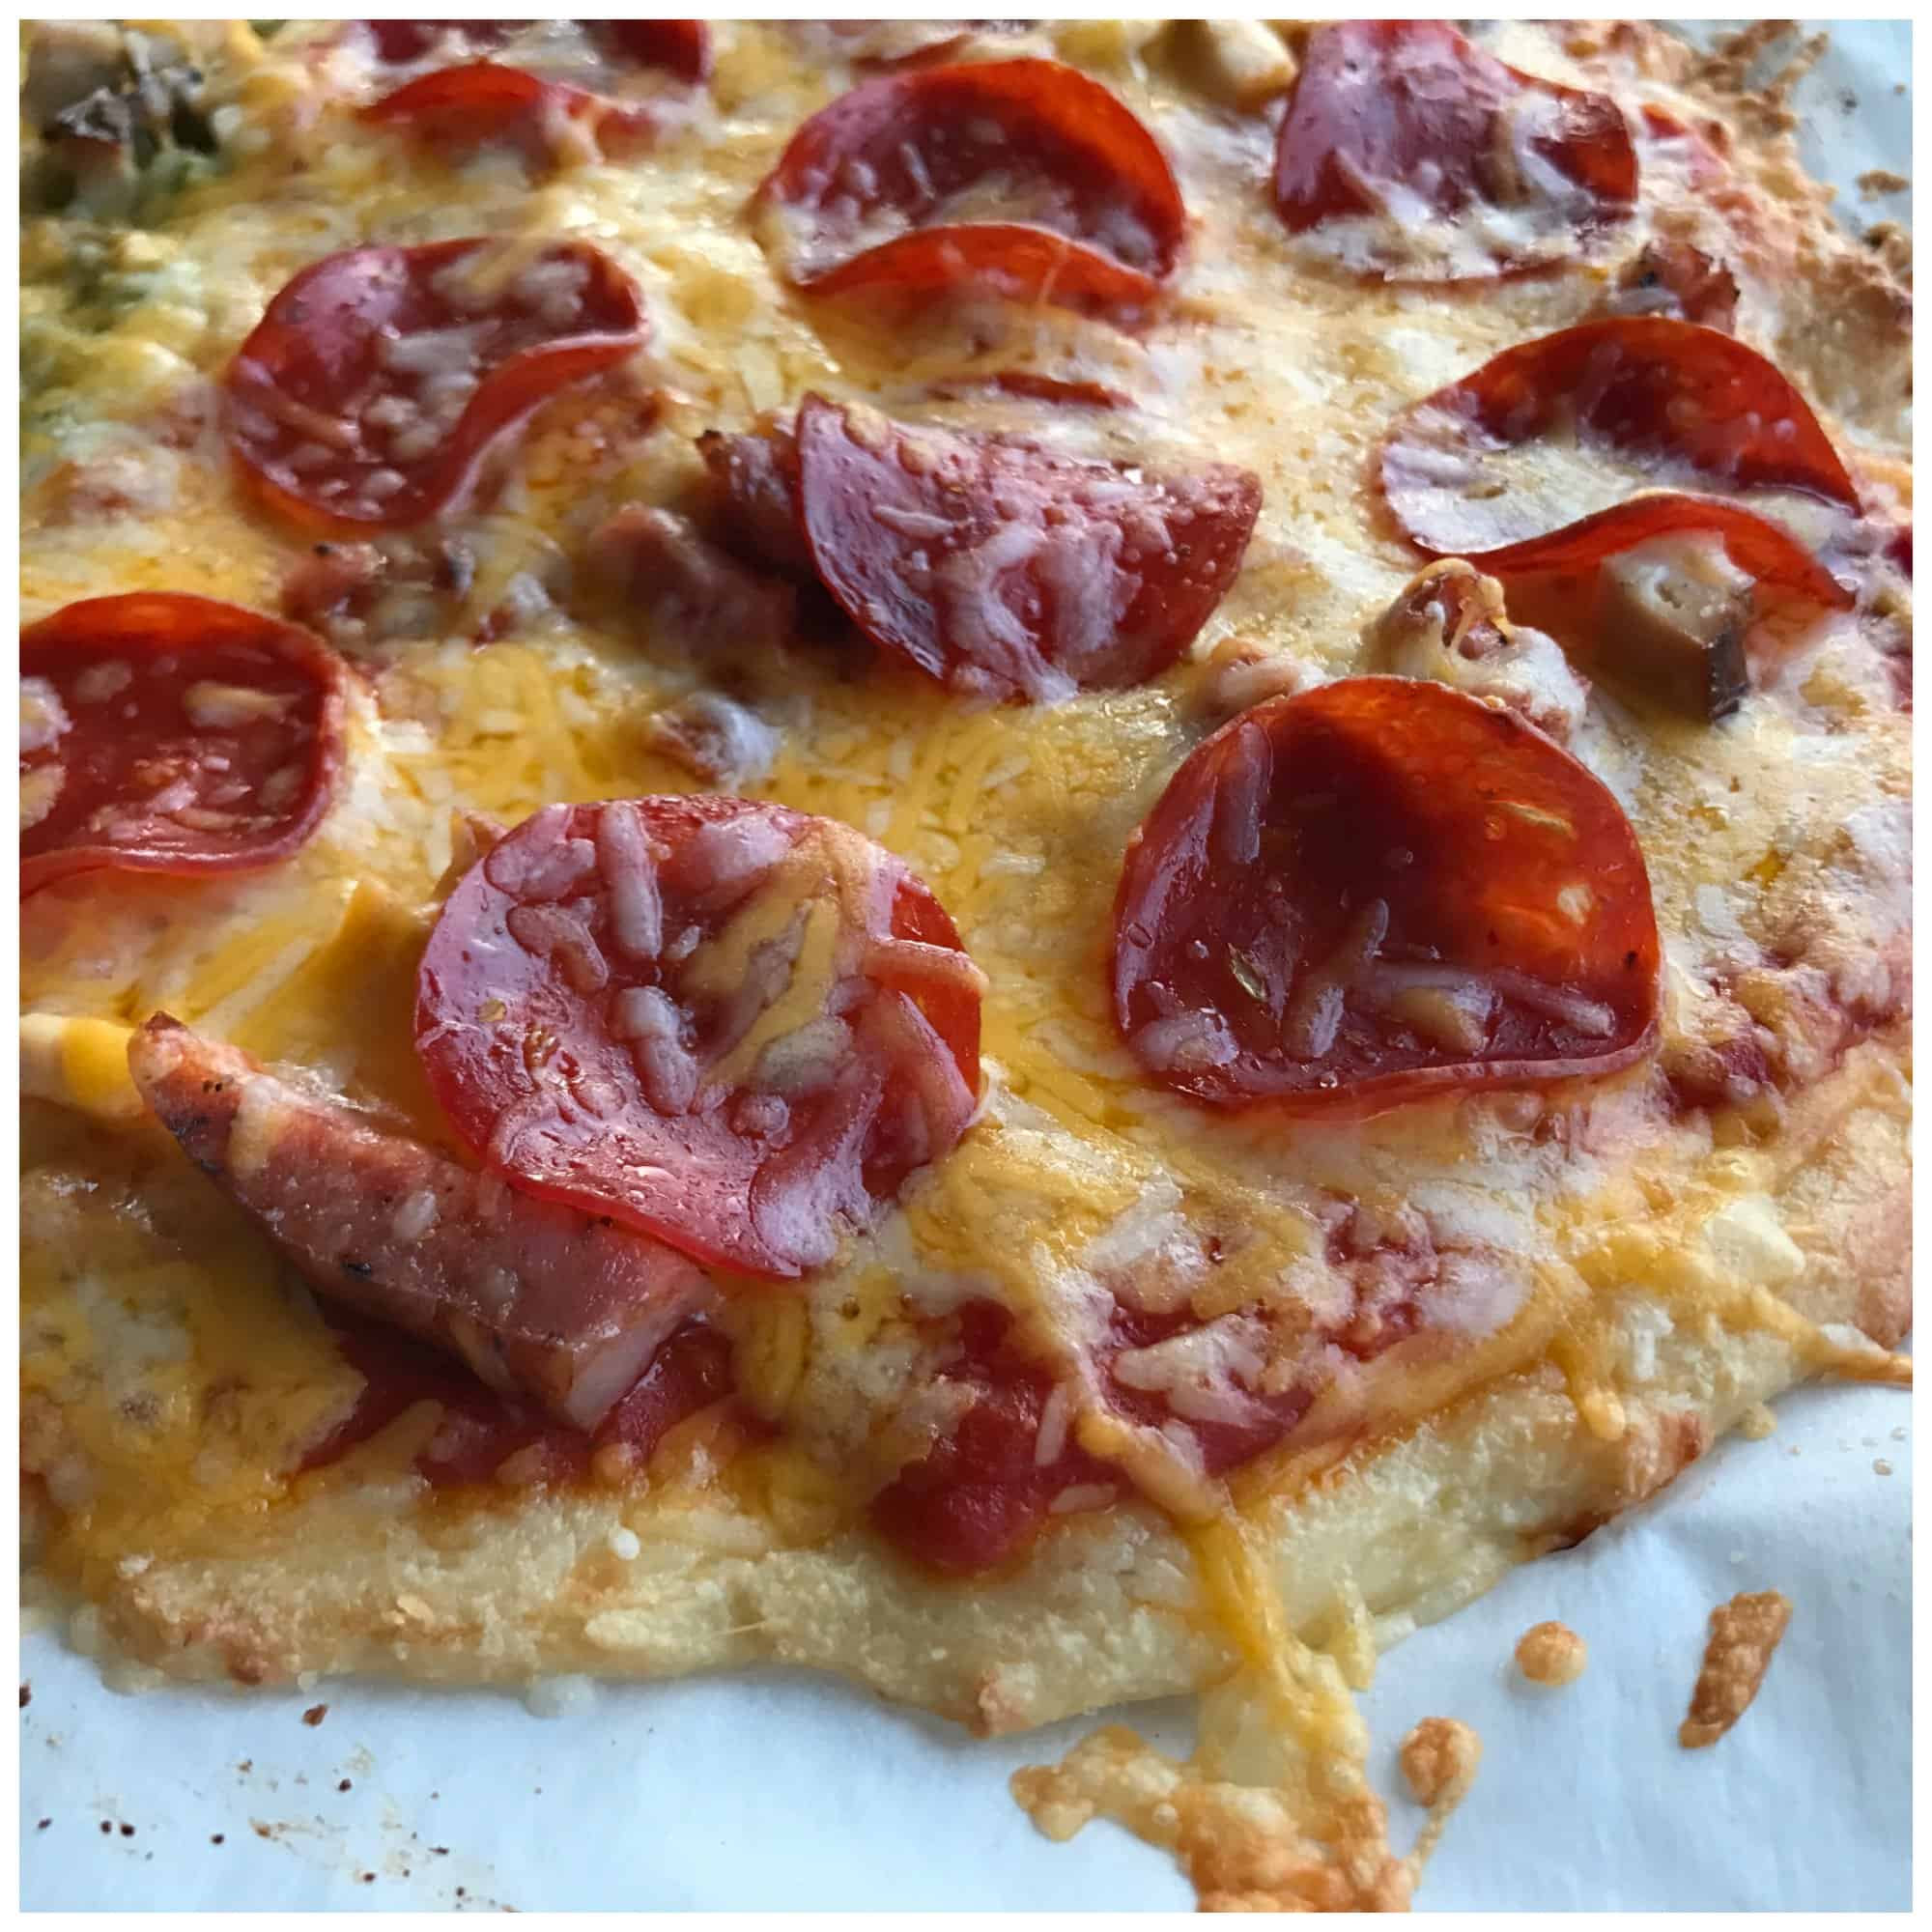 Best Low Carb Keto Friendly Pizza Recipe